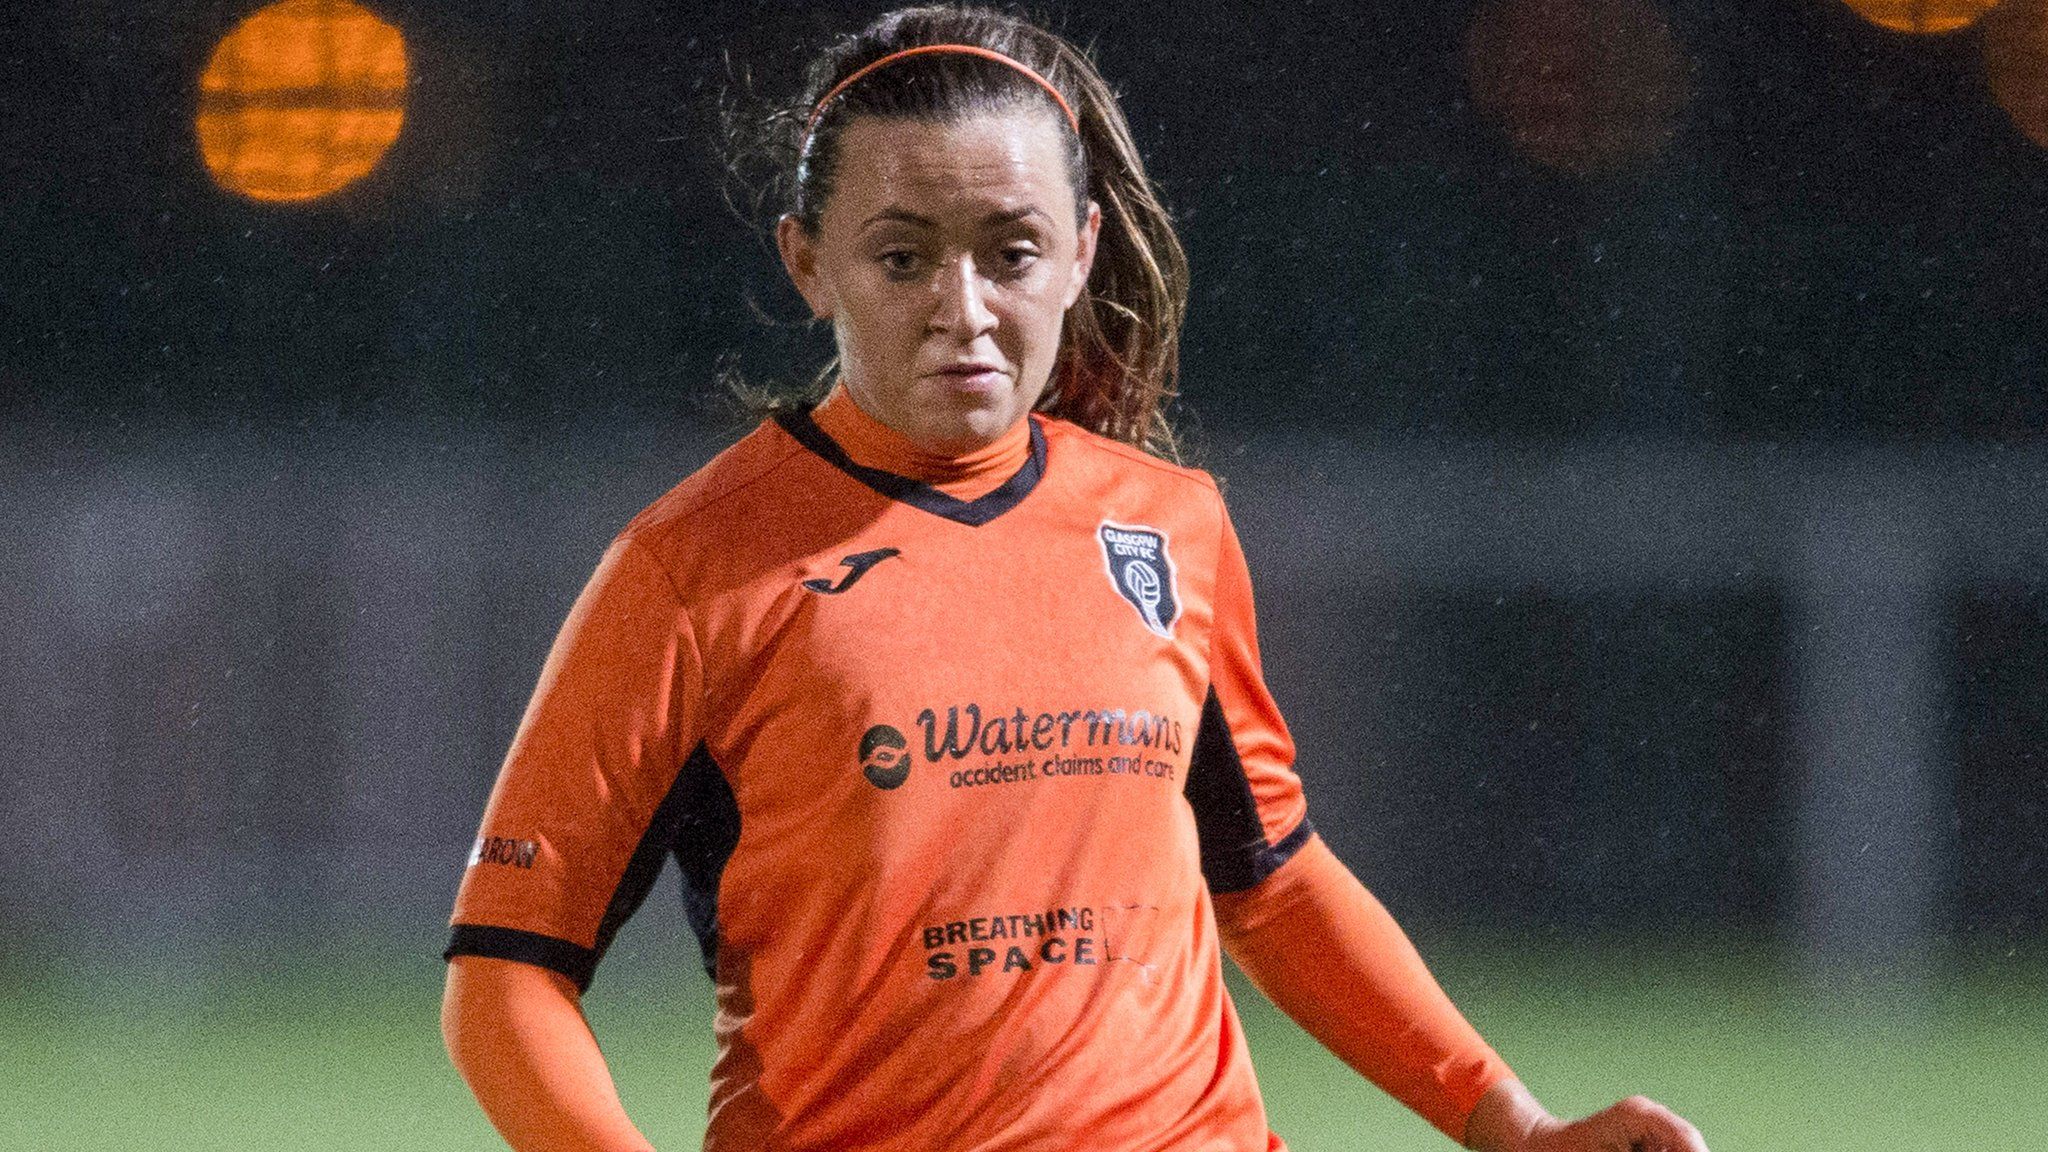 Glasgow City may be without Ireland captain Katie McCabe for the cup final